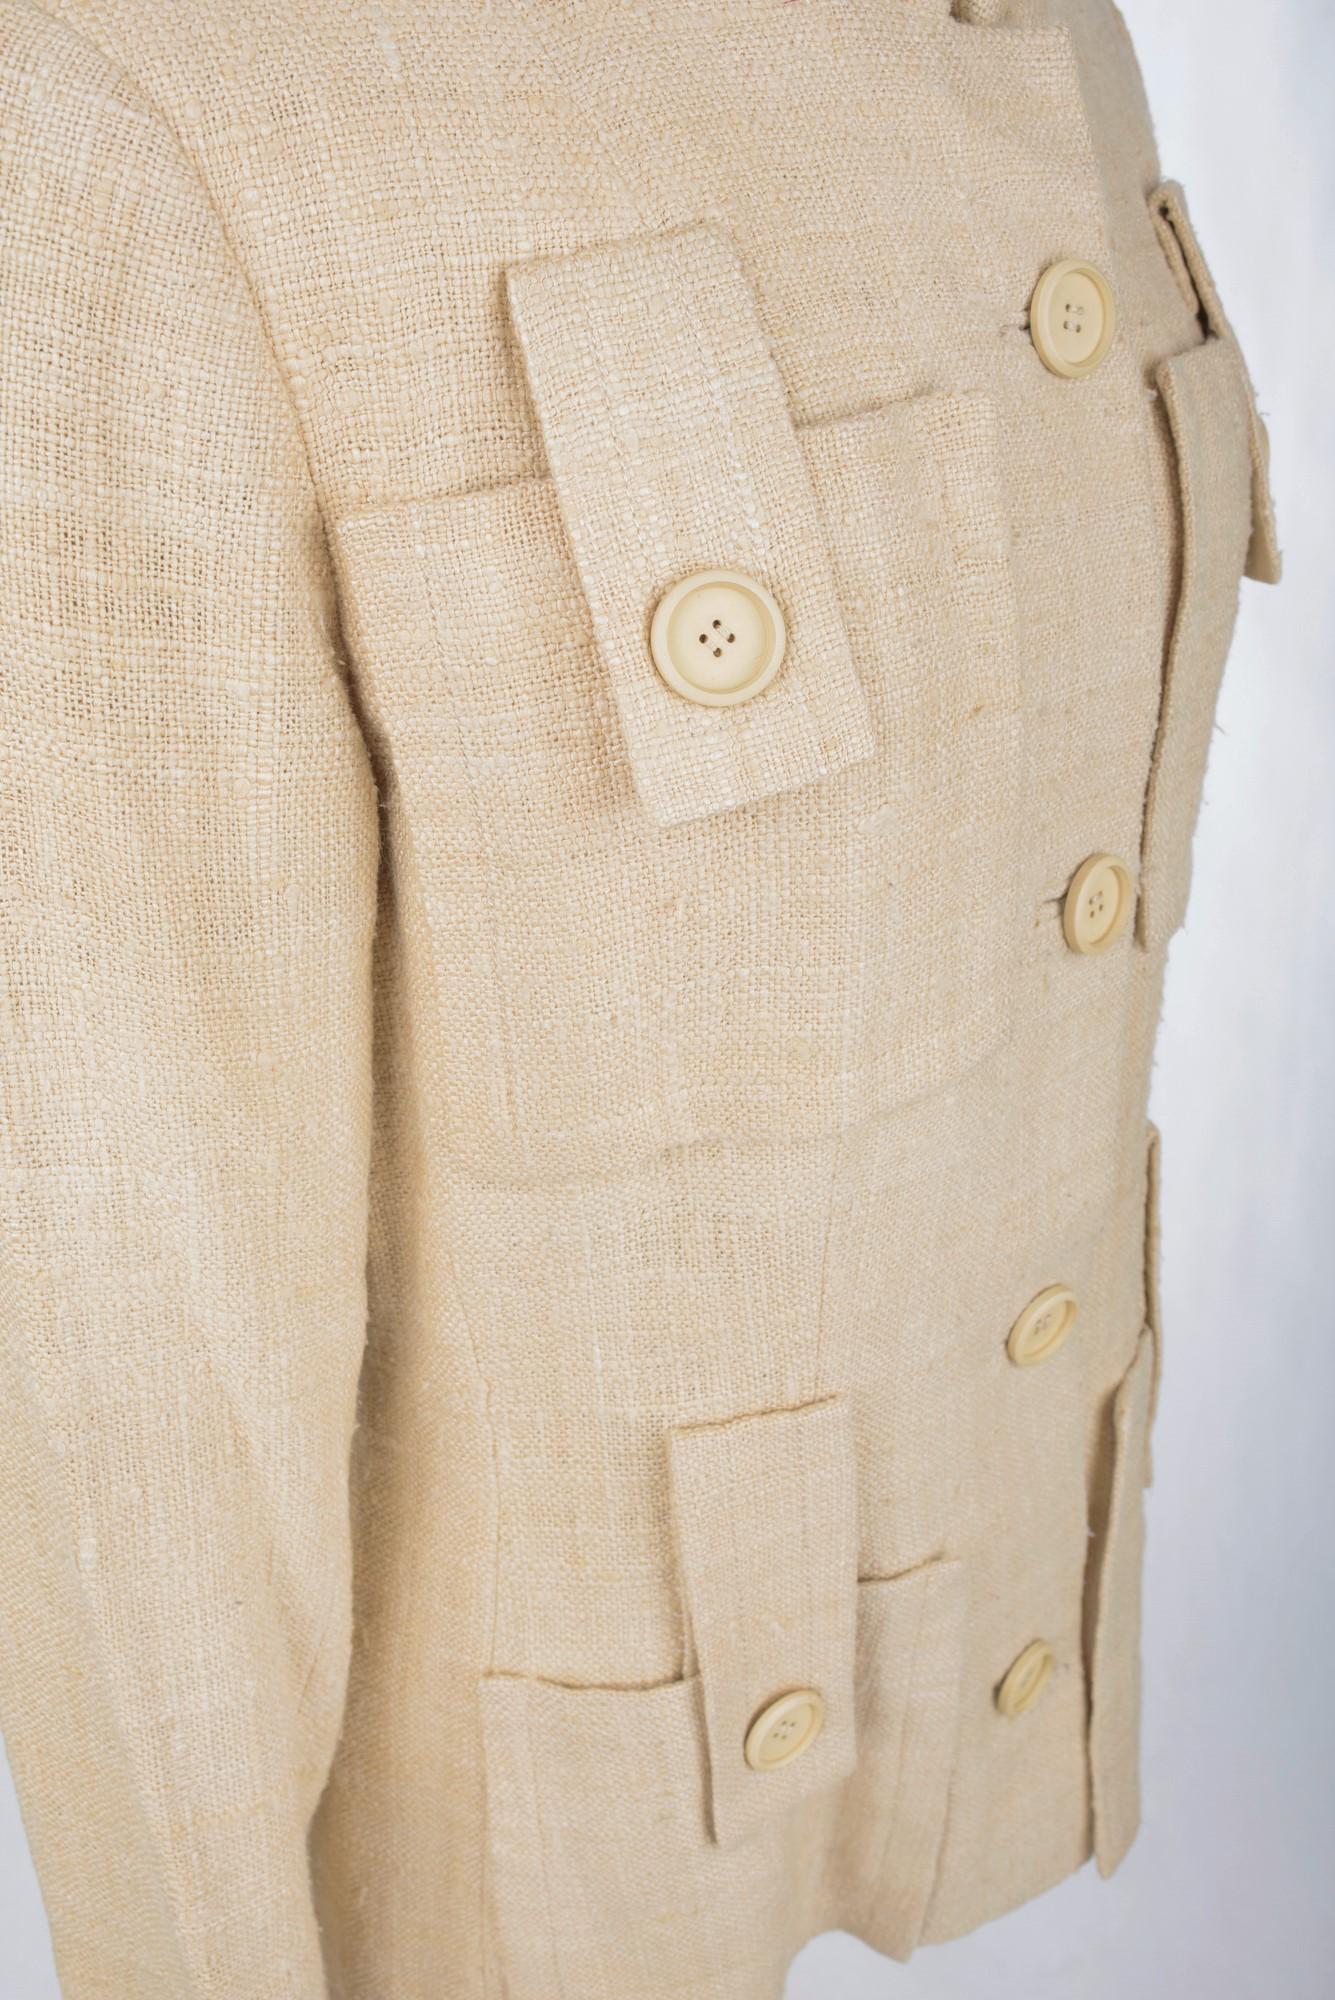  A French Safari Jacket In Beige Linen And Silk Toile Circa 1968-1972 For Sale 6